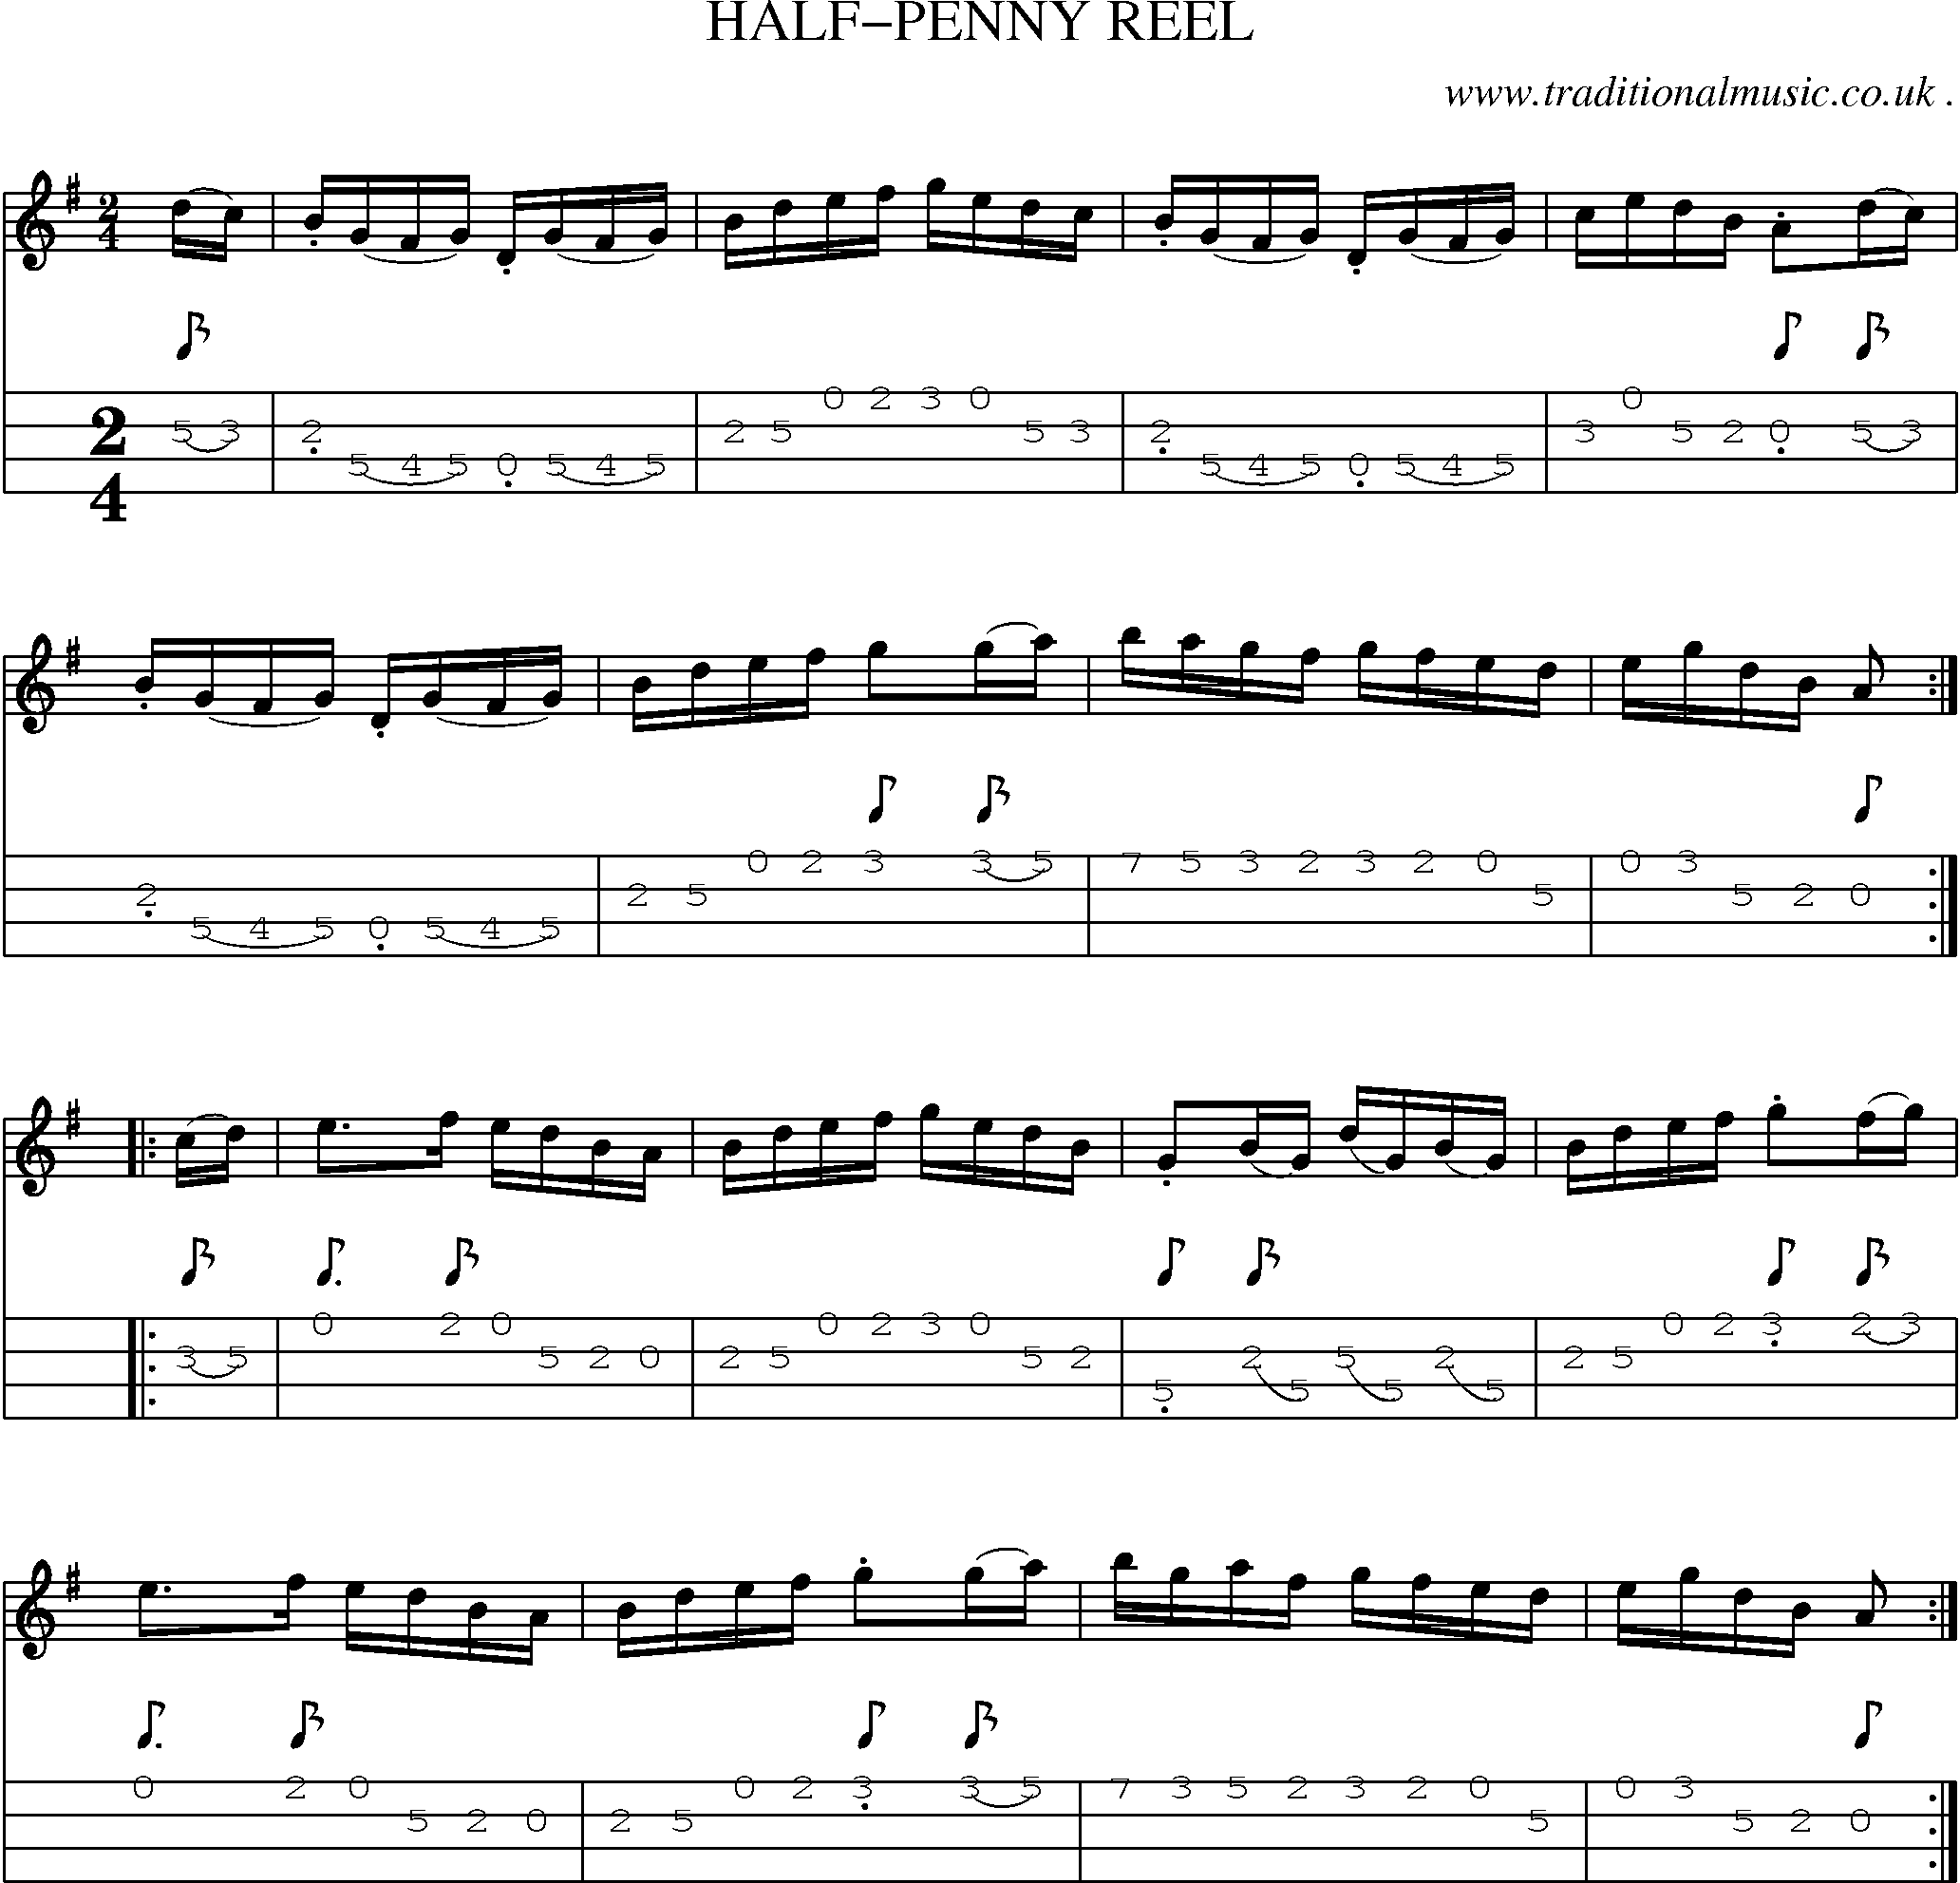 Sheet-Music and Mandolin Tabs for Half-penny Reel